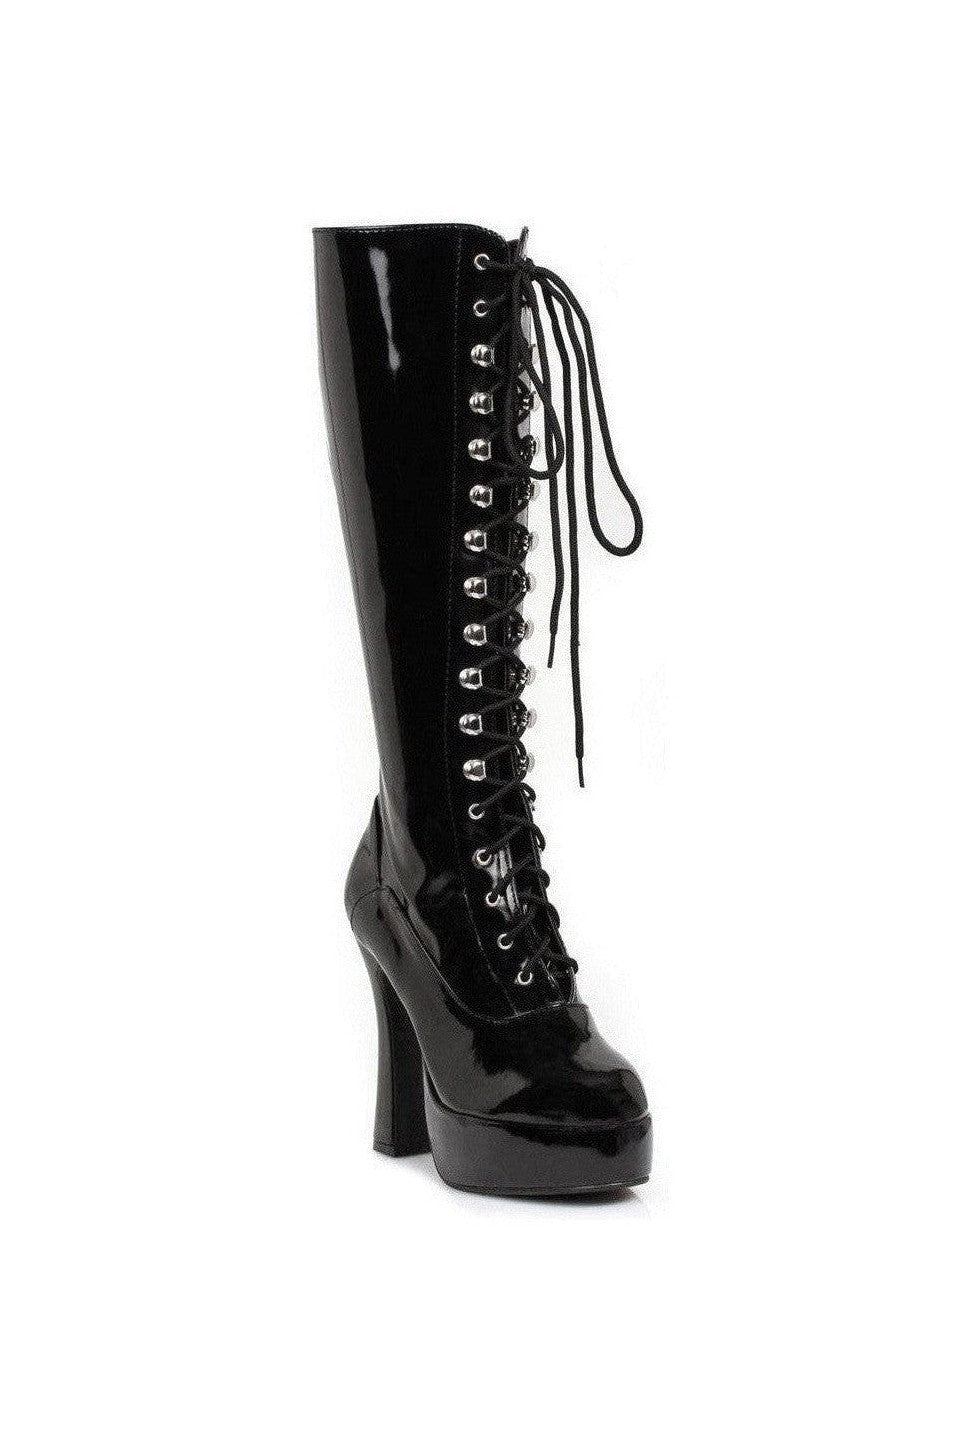 557-GINA Festival Boot | Black Patent-Ellie Shoes-Black-Knee Boots-SEXYSHOES.COM